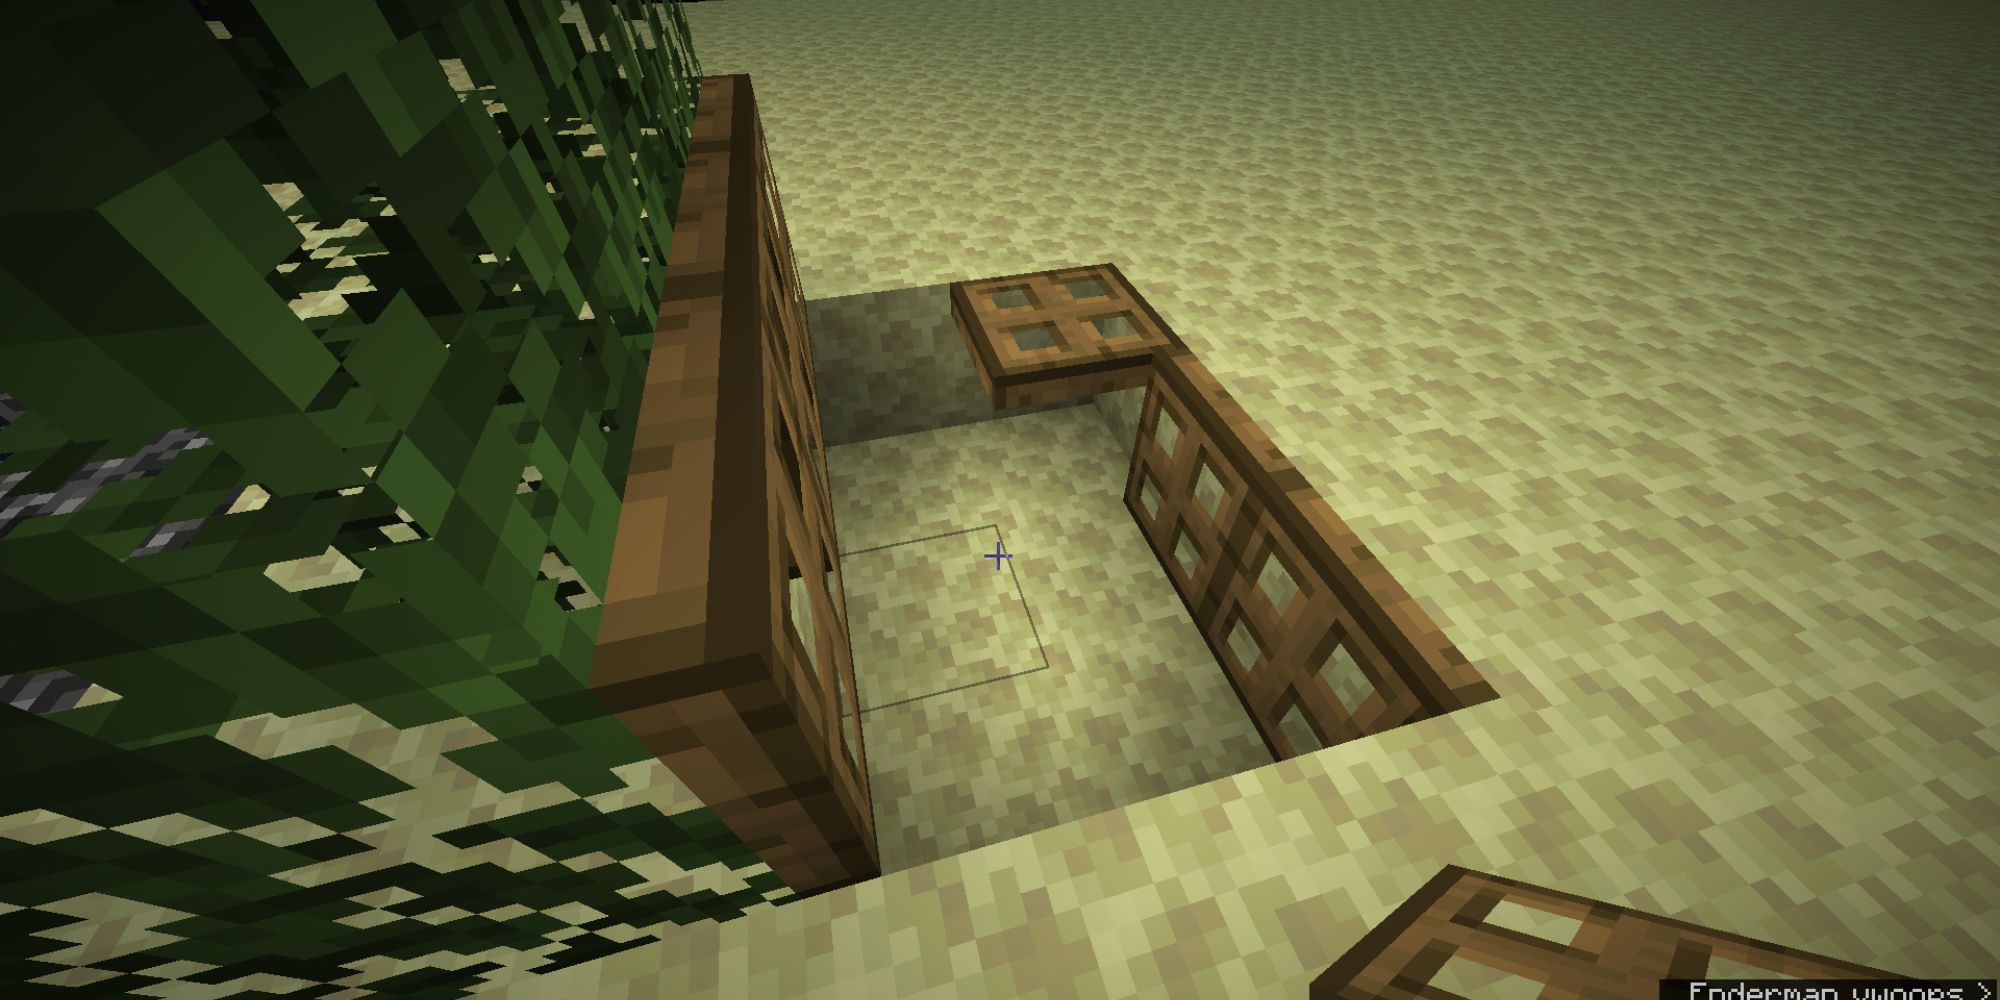 Minecraft Leaf Block Barrier Next To Mote With Trap Doors